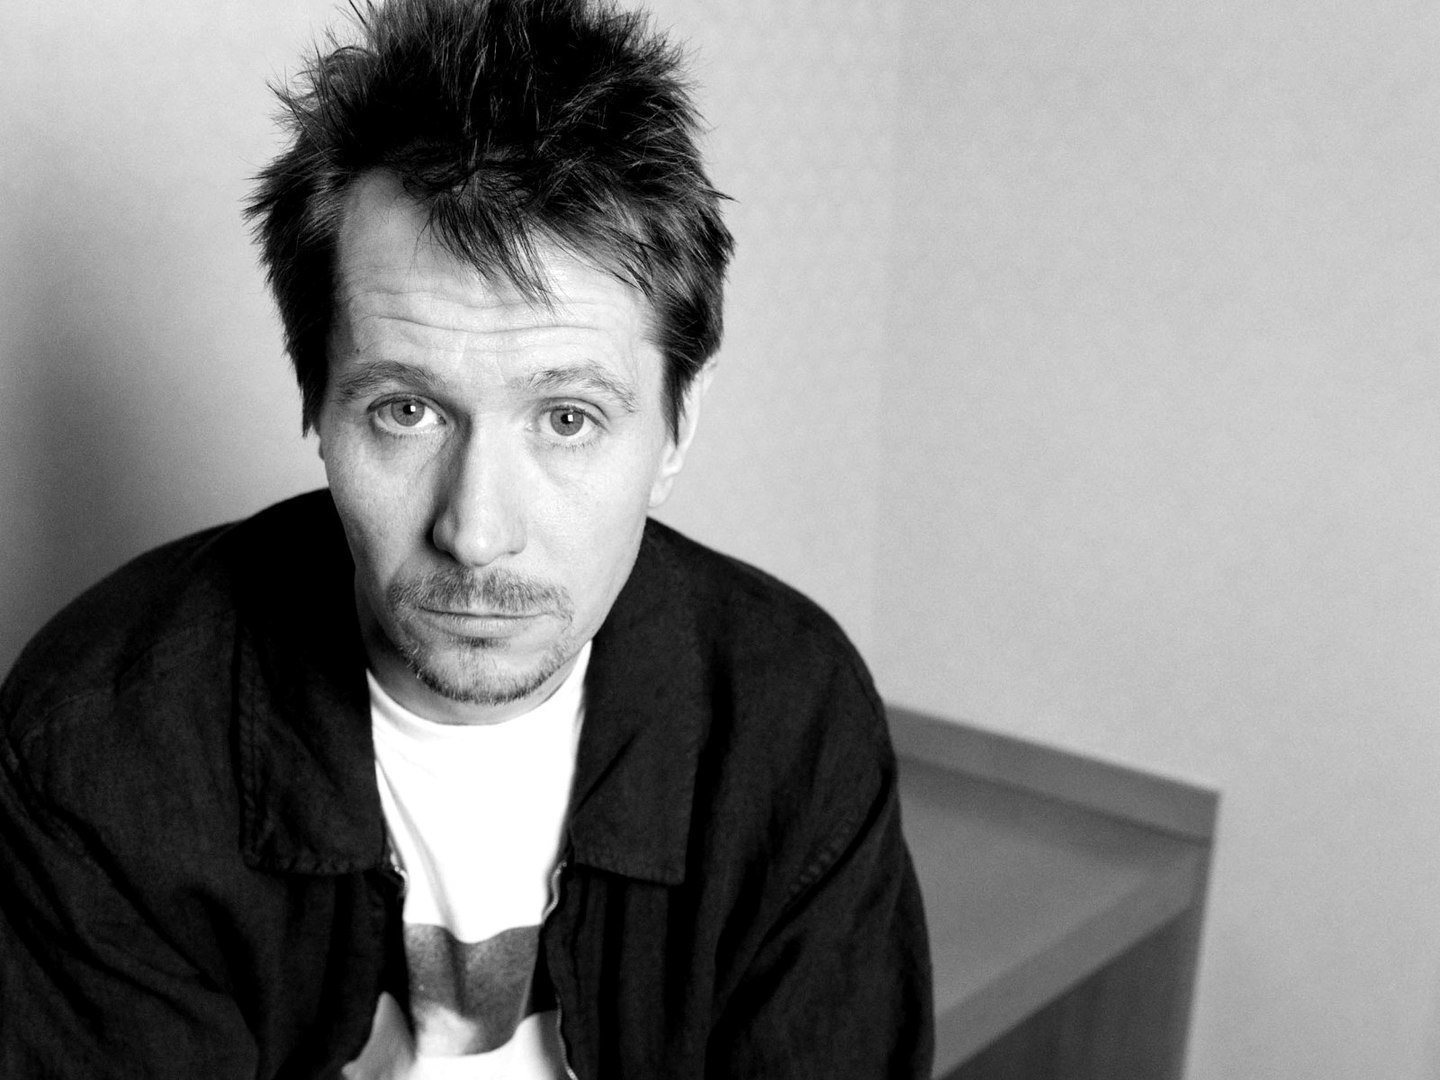 Happy Birthday, Gary Oldman!!
I hope that this will be a wonderful year for Gary. 